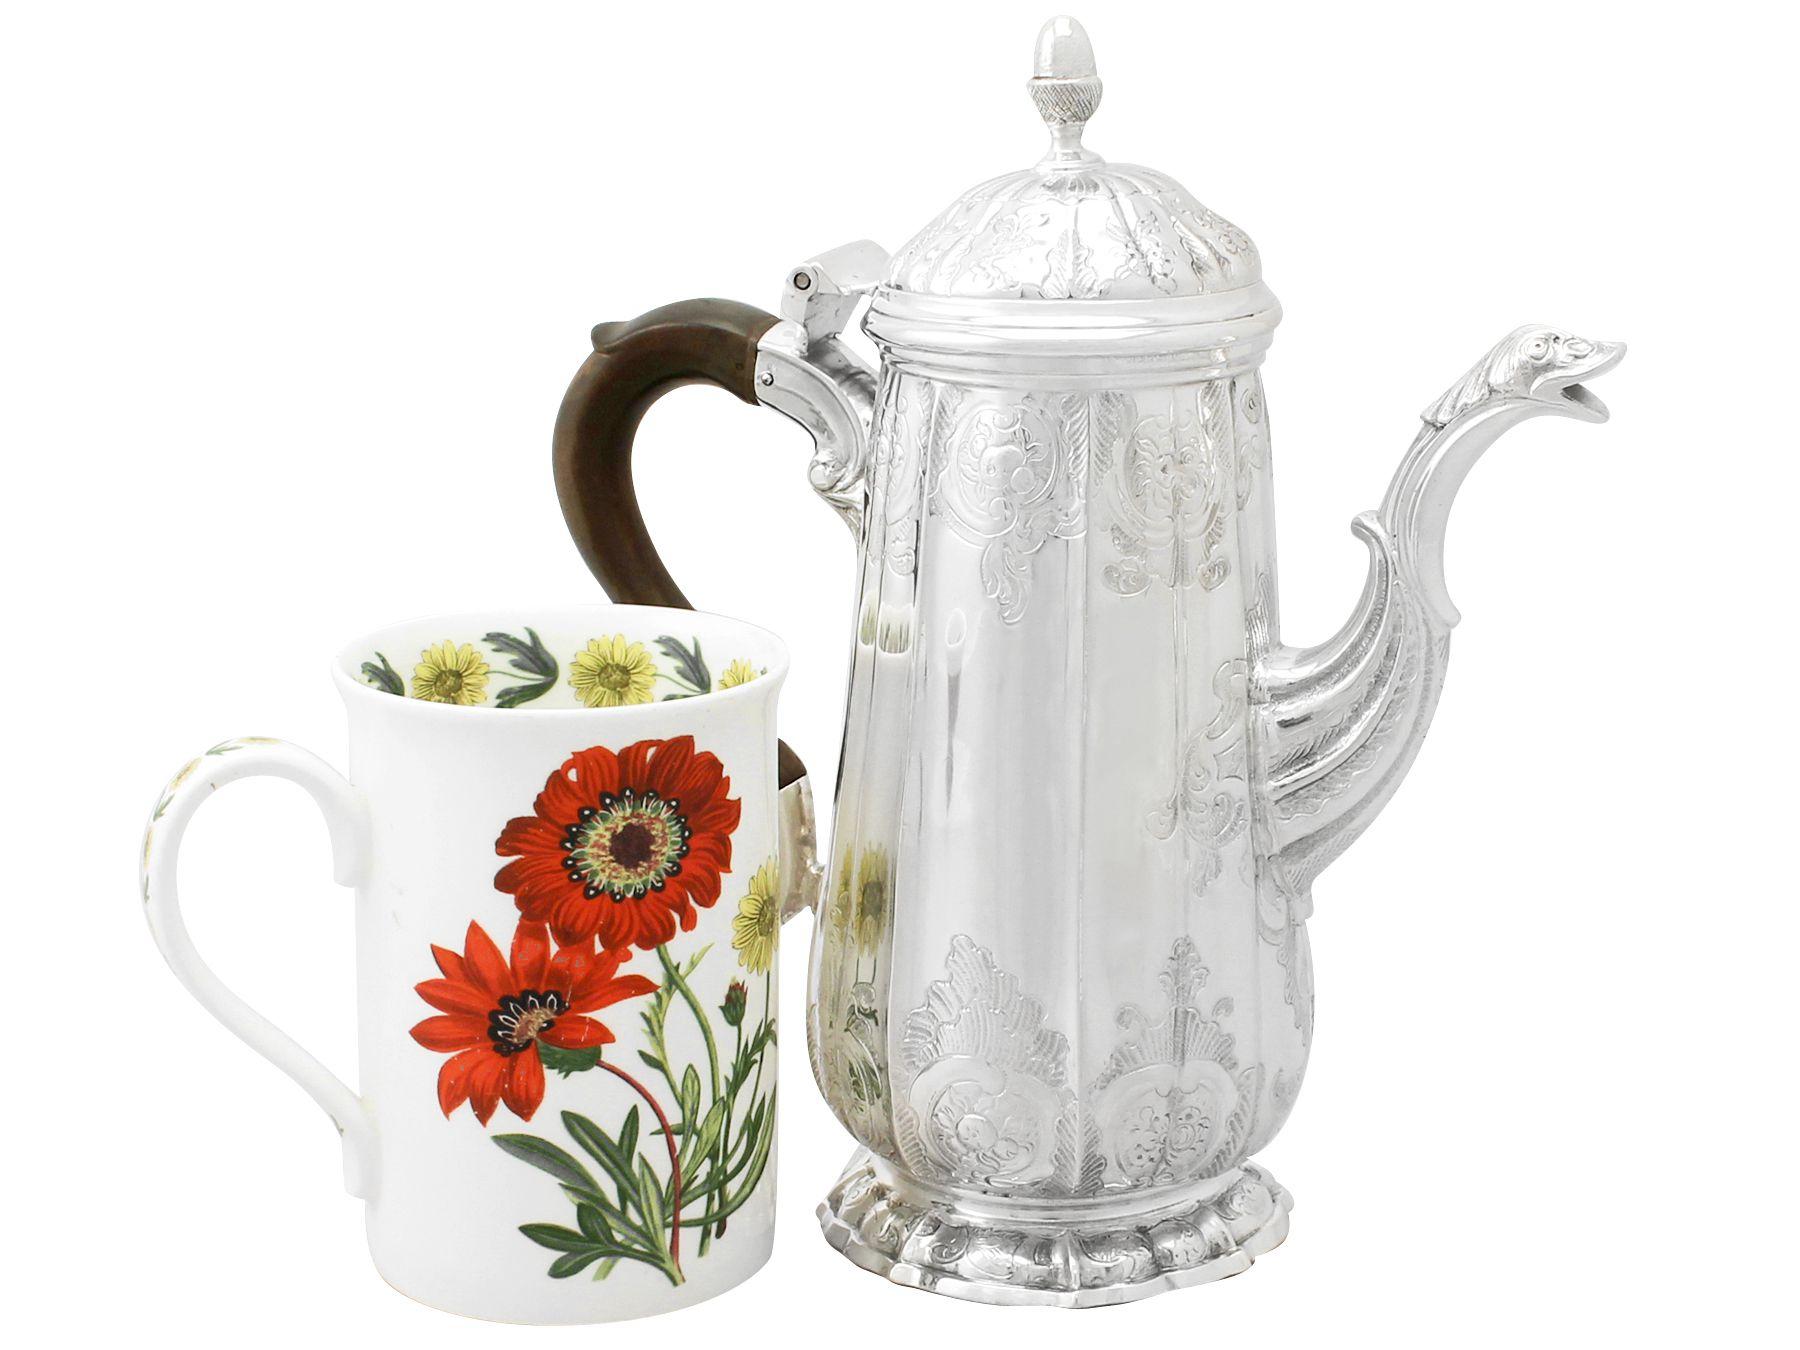 An exceptional, fine and impressive antique Georgian English sterling silver coffee pot made by John Pollock; an addition to our silver teaware collection.

This exceptional antique George II sterling silver coffee pot has a tapering cylindrical